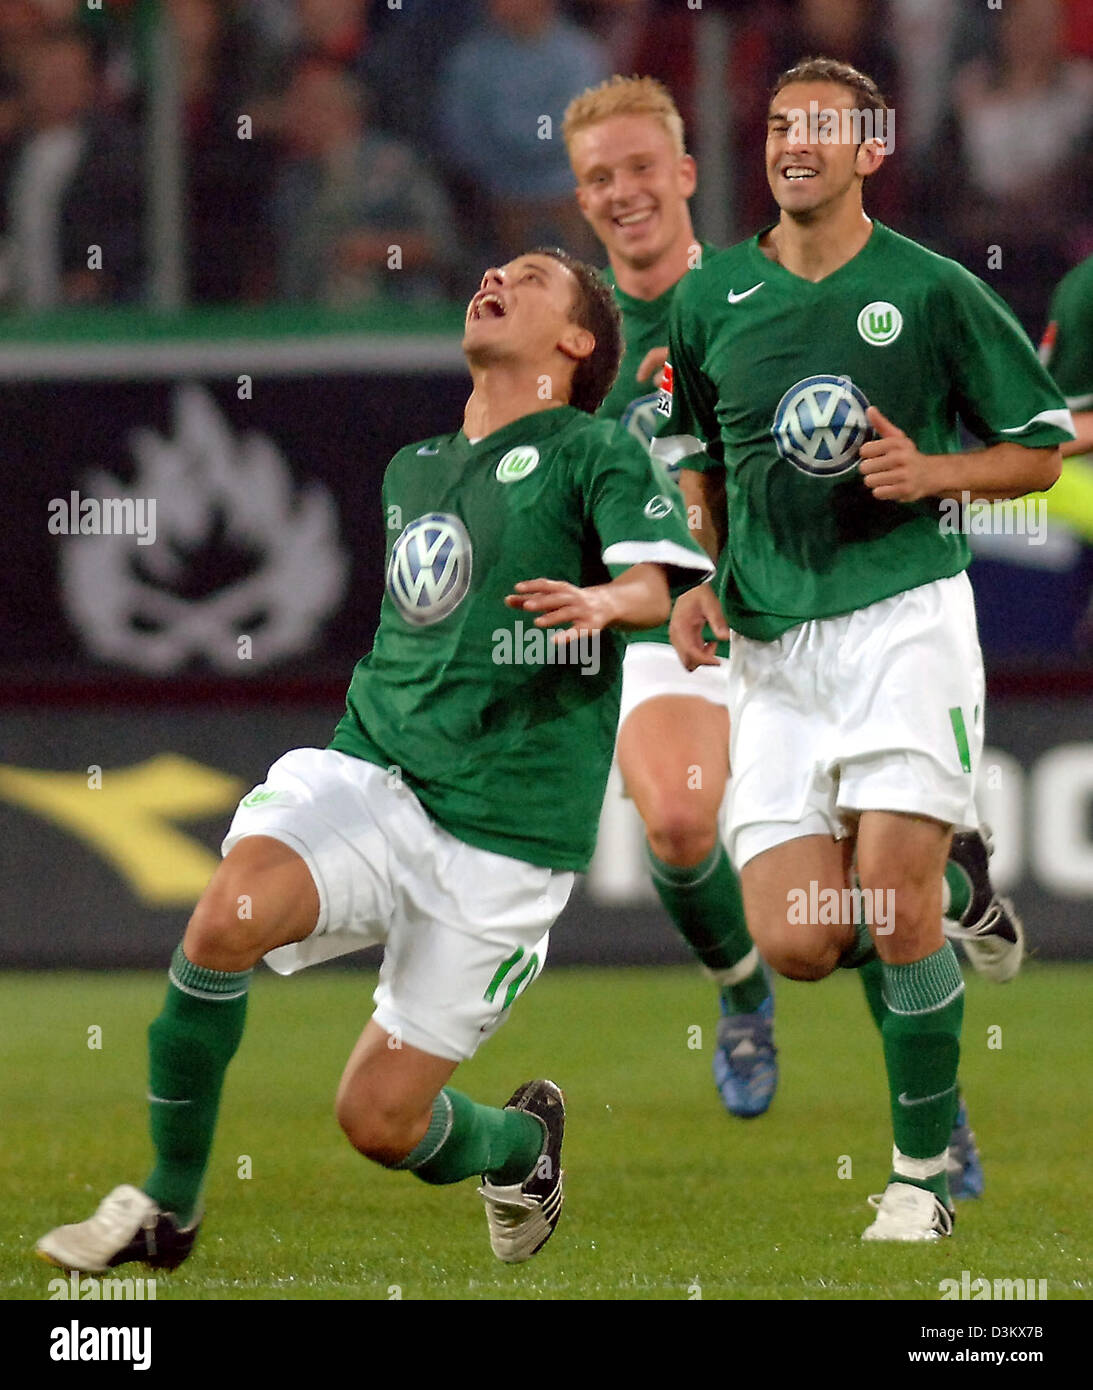 (dpa) - VfL Wolfsburg's Andres D'Alessandro celebrates together with his teammates Mike Hanke and Facundo Quiroga (L-R) his goal against Bundesliga rival Hanover 96 at the AWD-Arena stadium in Hanover, Germany, Tuesday 20 September 2005. Wolfsburg won the match 4-2. Photo: Holger Hollemann Stock Photo